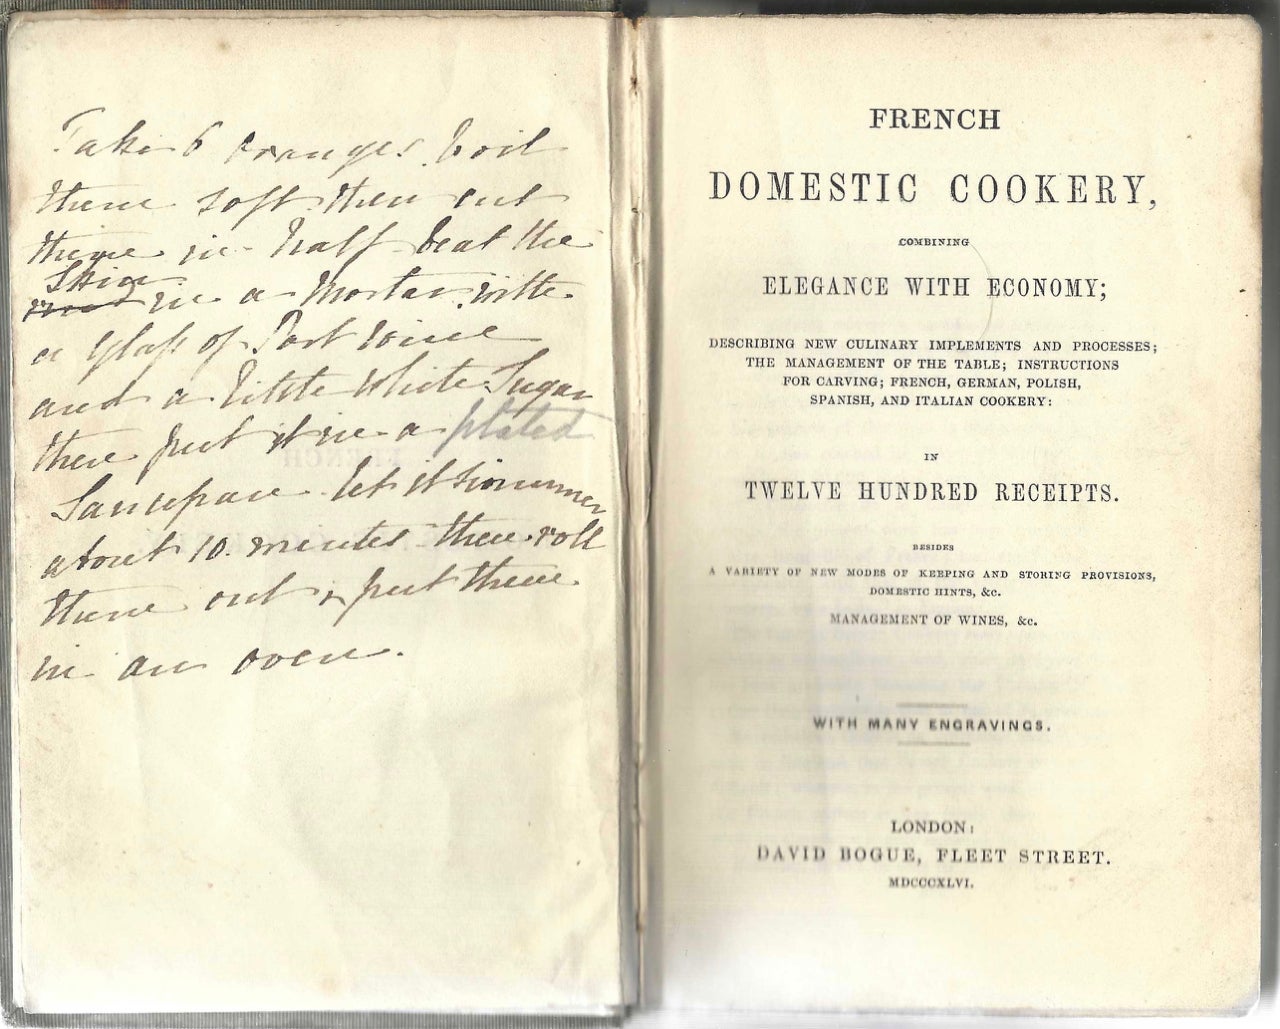 Item #8959 French Domestic Cookery, Combining Elegance with Economy; Describing New Culinary Implements and Processes; the Management of the Table; Instructions for Carving; French, German, Polish, Spanish and Italian Cookery: in Twelve Hundred Receipts, besides a Variety of New Modes of Keeping and Storing Provisions, Domestic Hints, &c... Management of Wines, &c. With many engravings. Louise Eustache Audot.